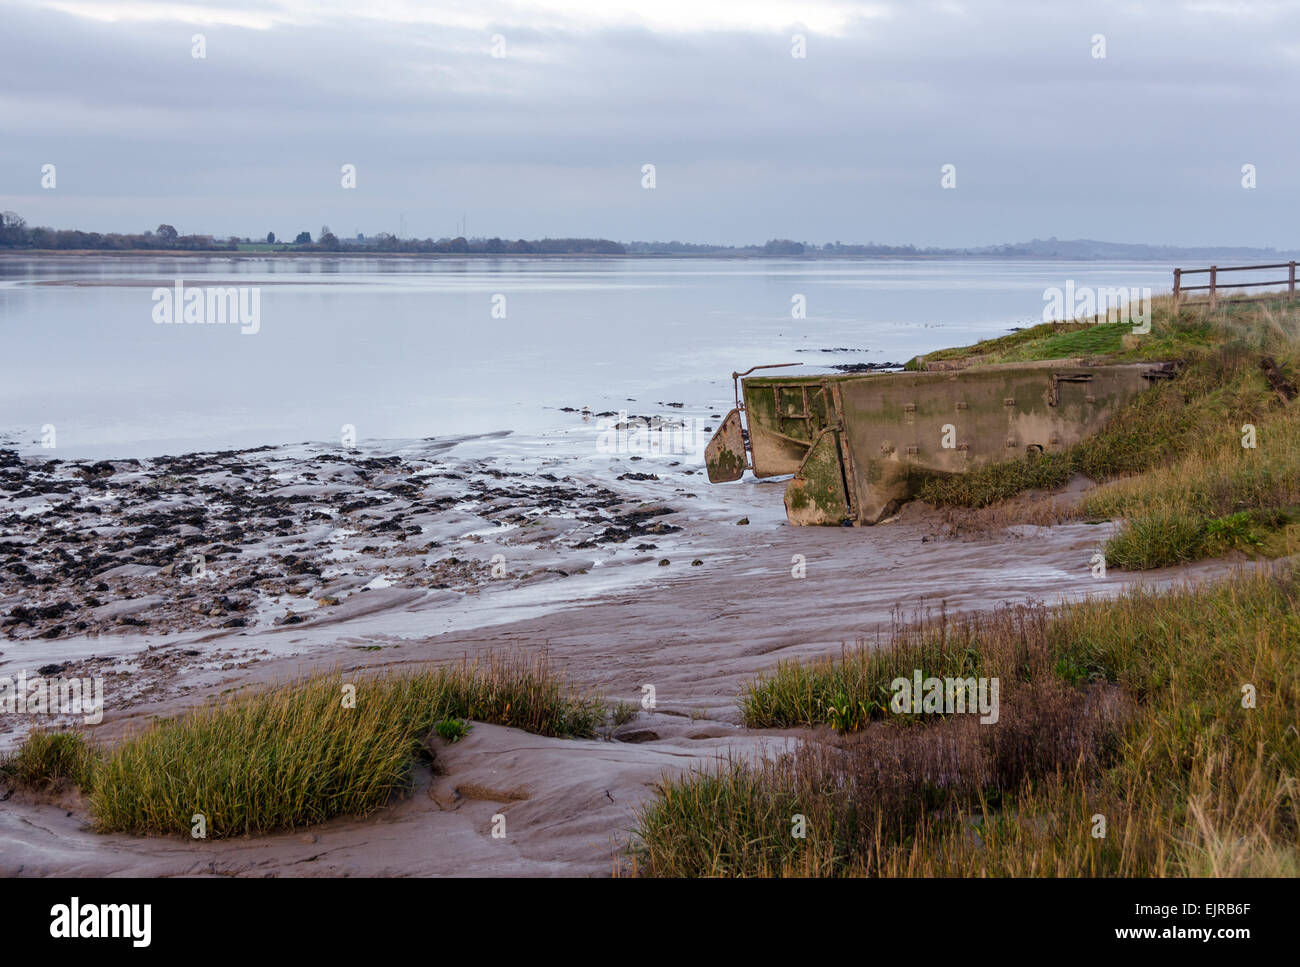 Purton Ships Graveyard on the River Severn near Sharpness . Many old barges have been deliberately sunk here to prevent erosion. Stock Photo